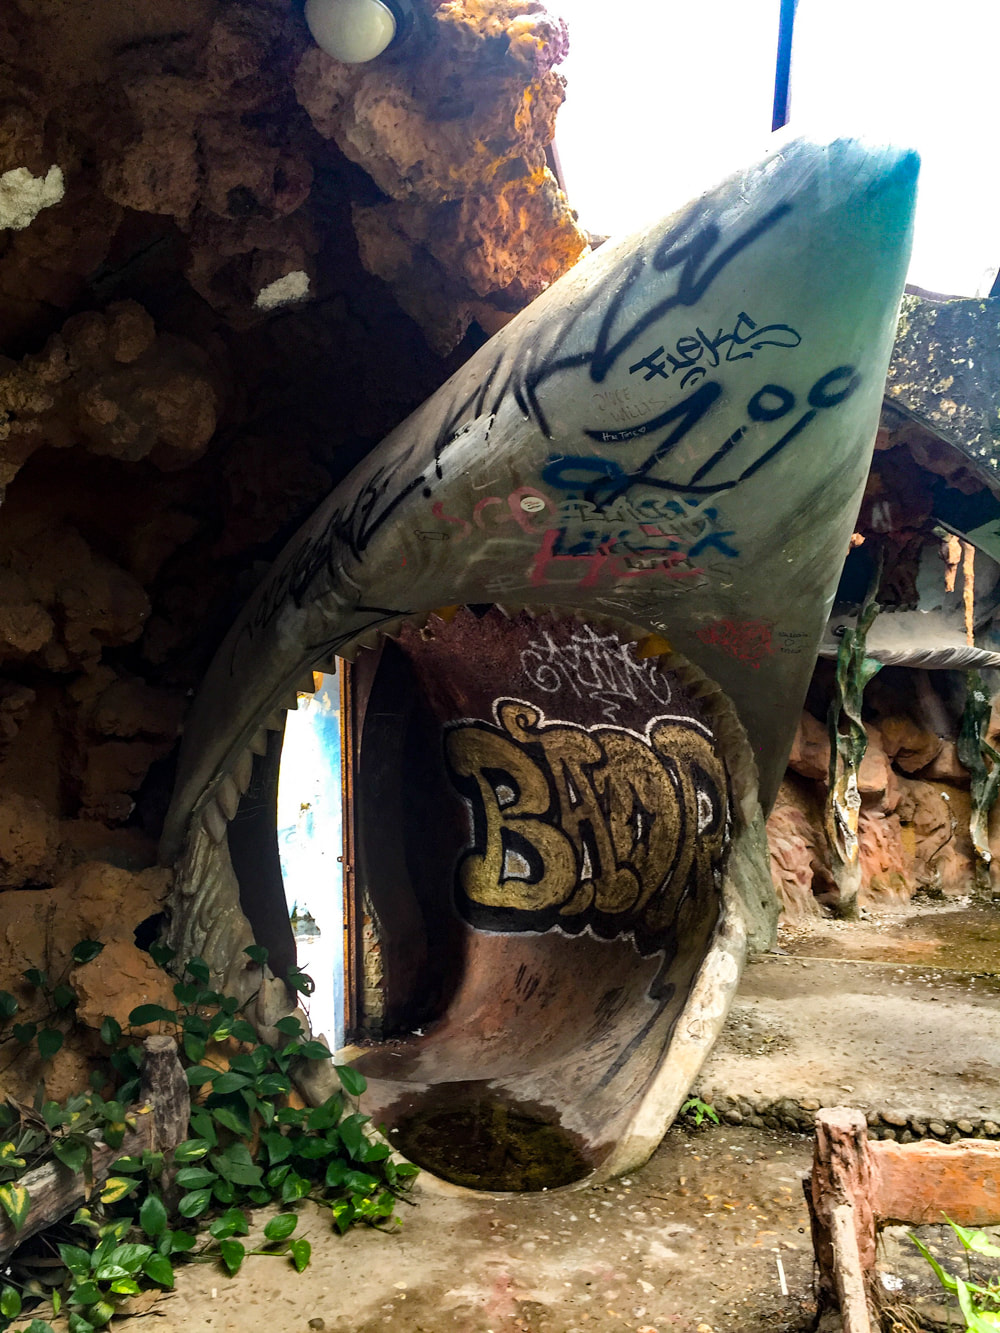 Walk through the mouth of the shark // Hue: Ho Thuy Tien, Photos of Vietnam's Abandoned Water Park.